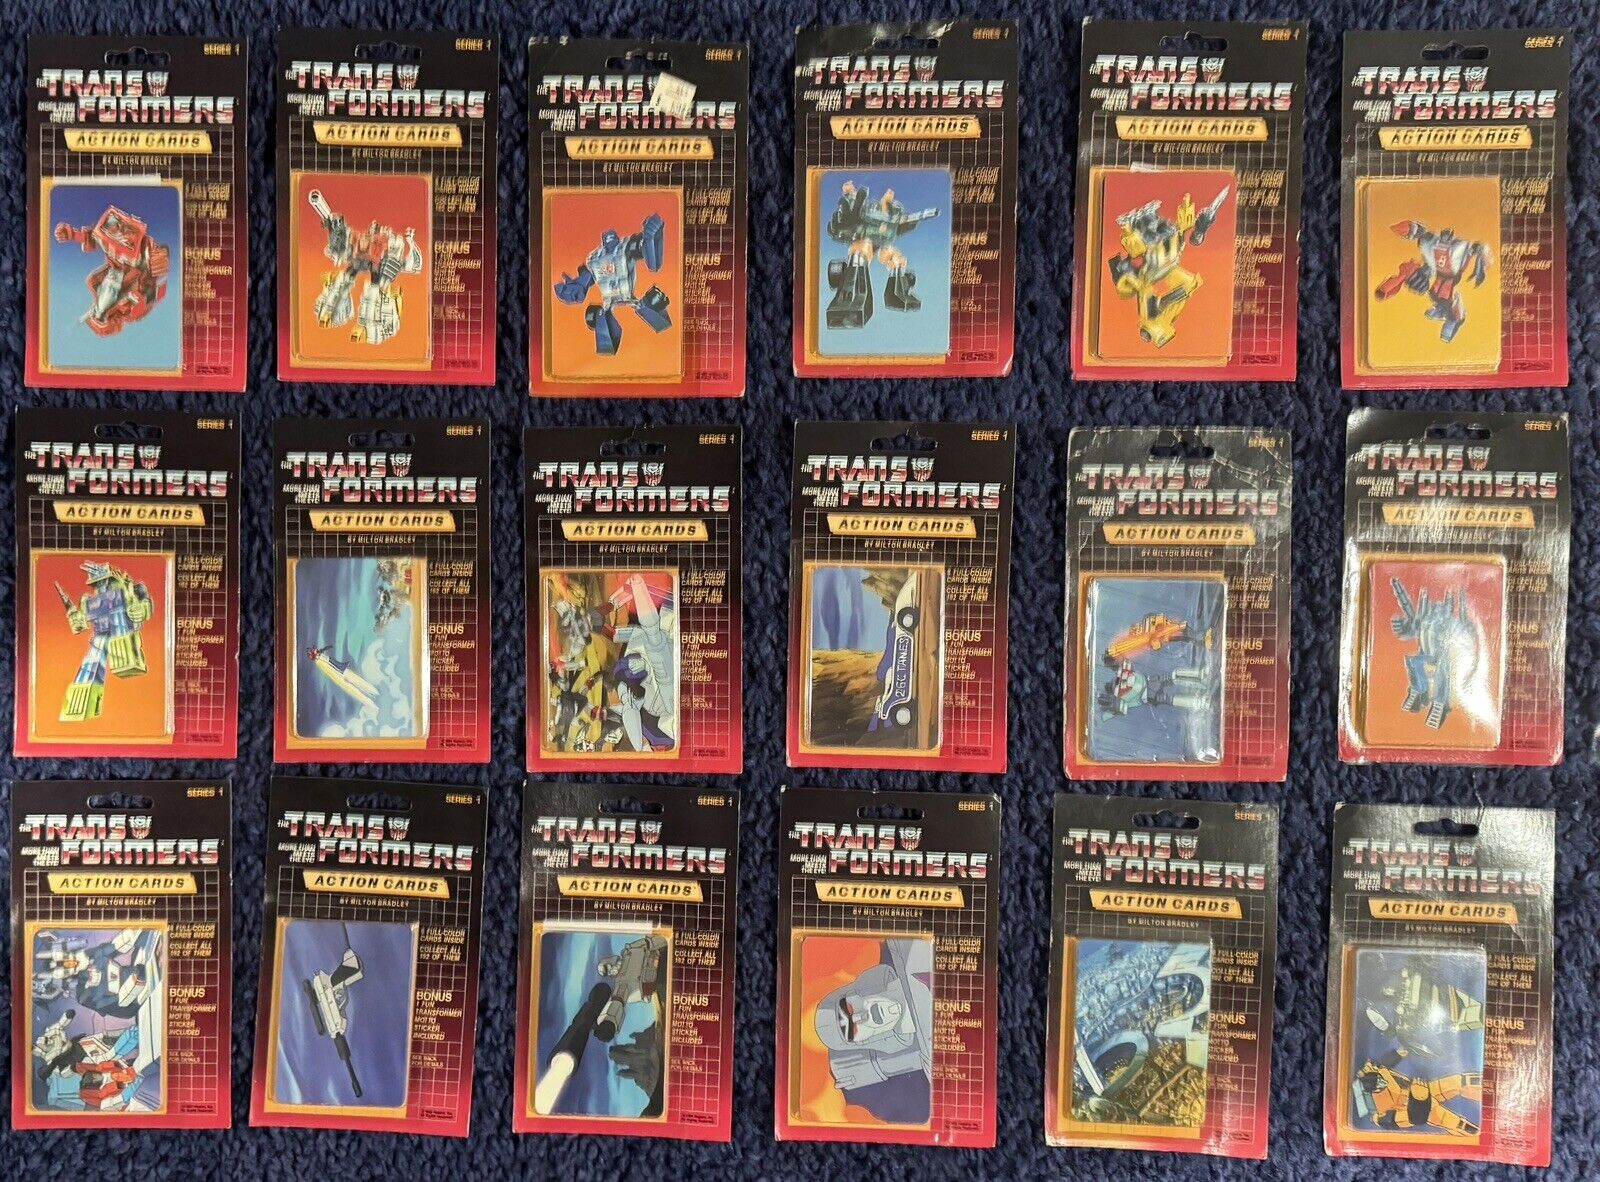 1985 Hasbro Transformers Action Cards - Lot of 18 Sealed Packs